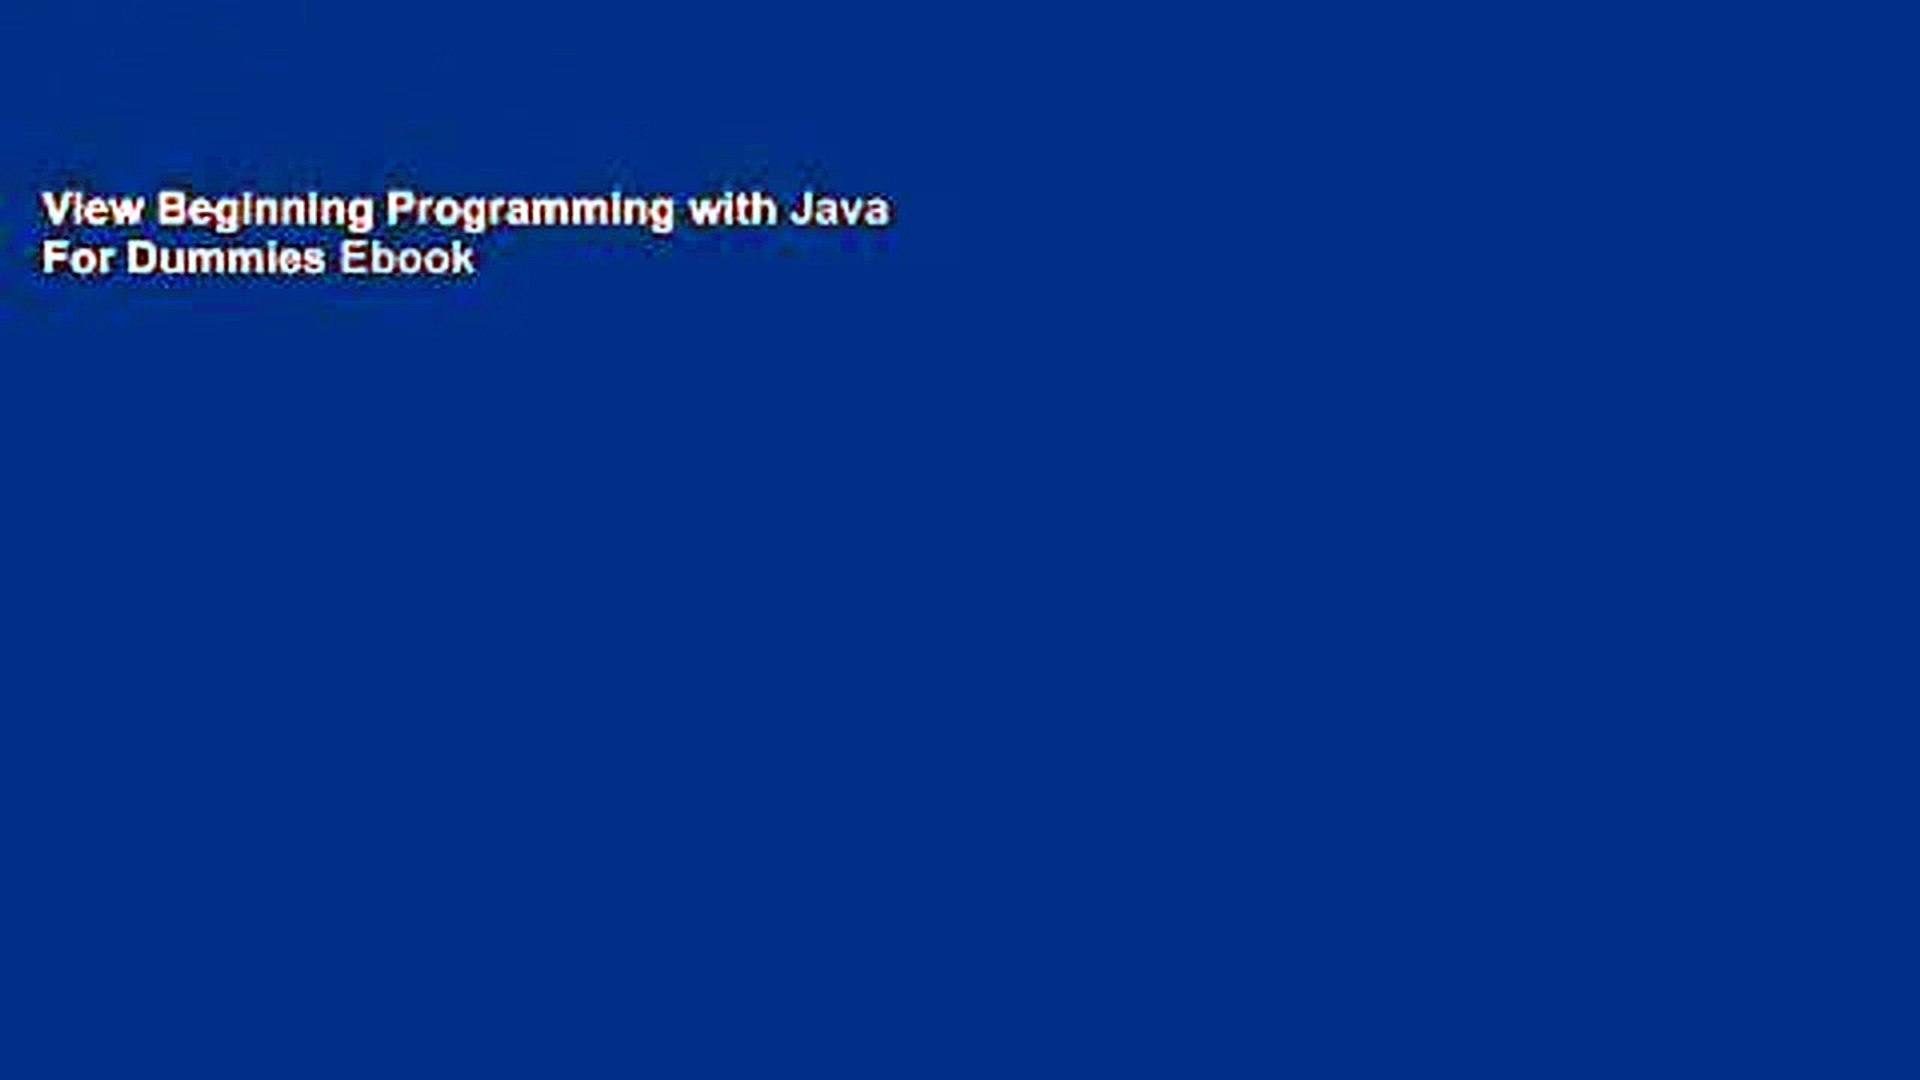 View Beginning Programming with Java For Dummies Ebook